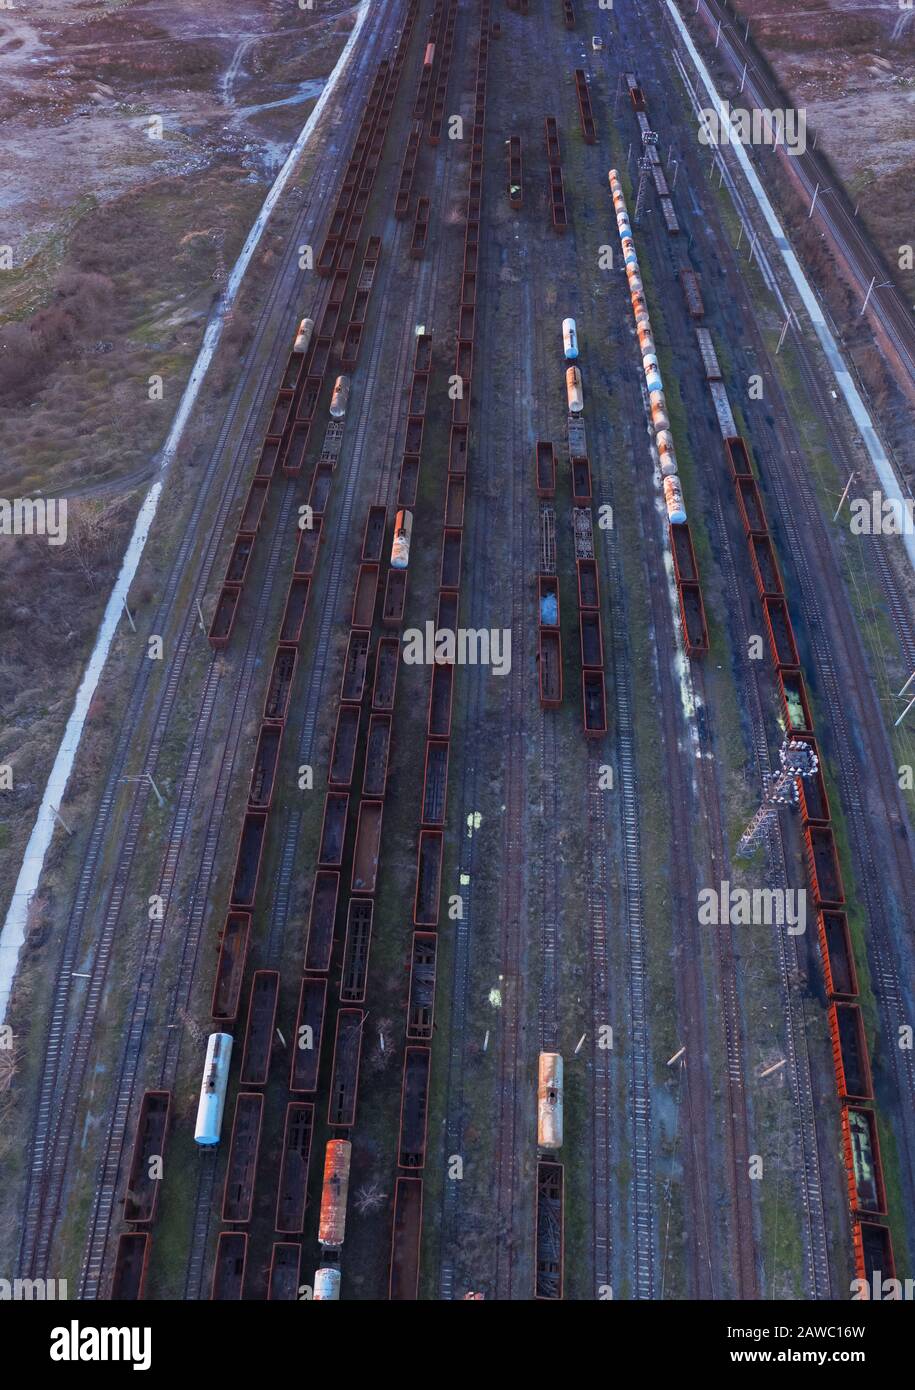 Freight trains on the railway station Stock Photo